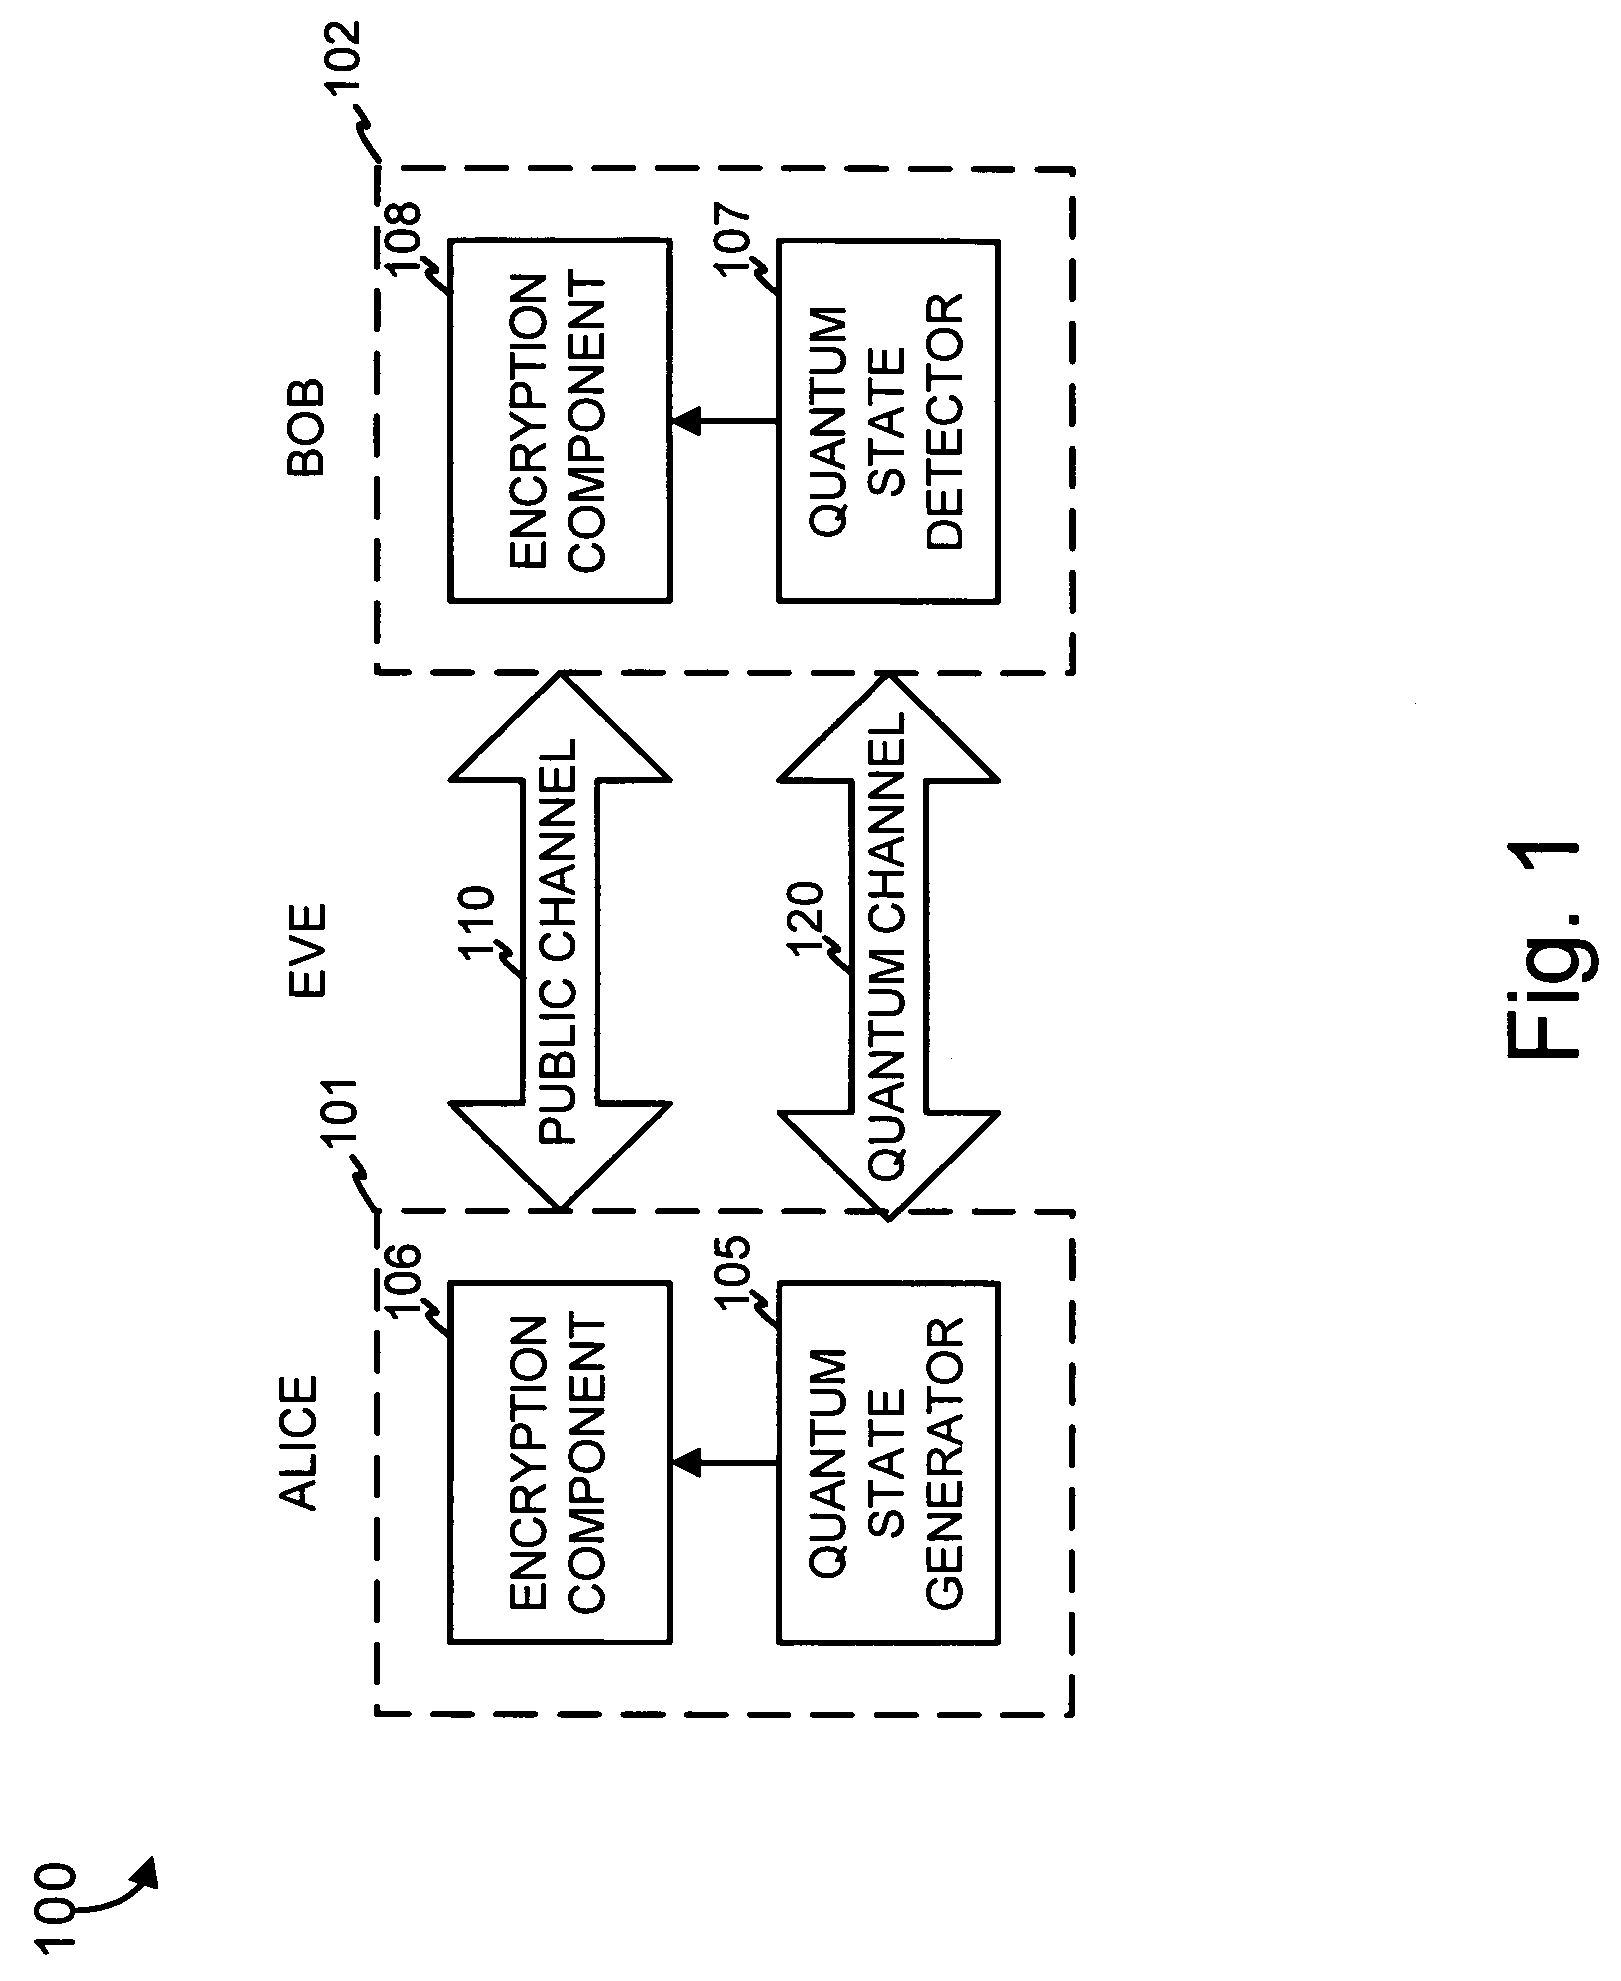 Authentication in a quantum cryptographic system